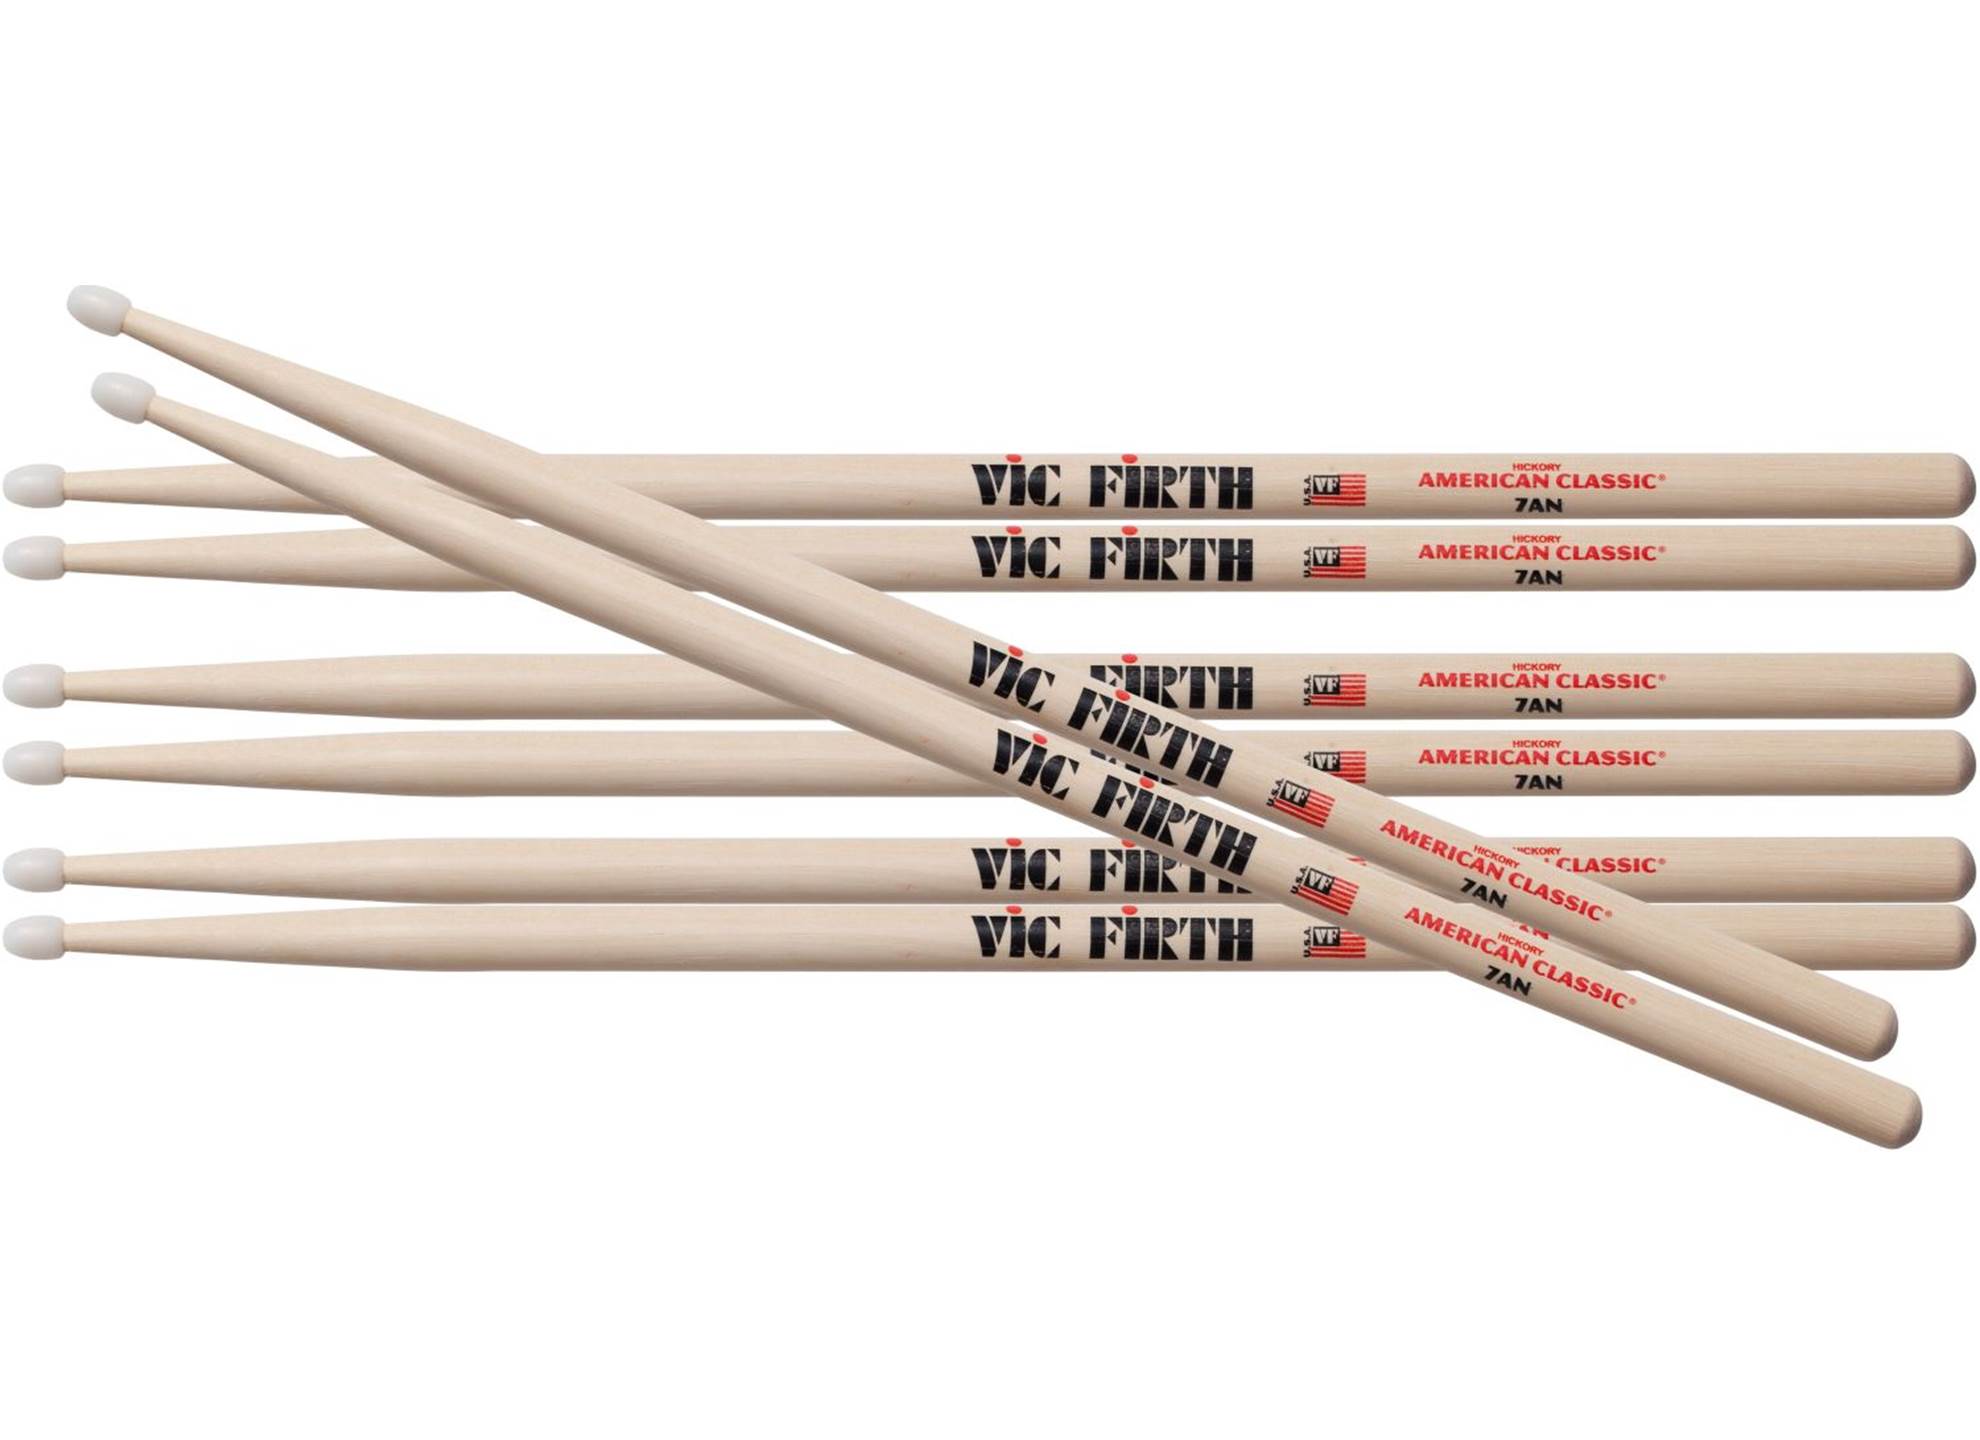 7AN Value Pack American Classic Hickory 4-pack